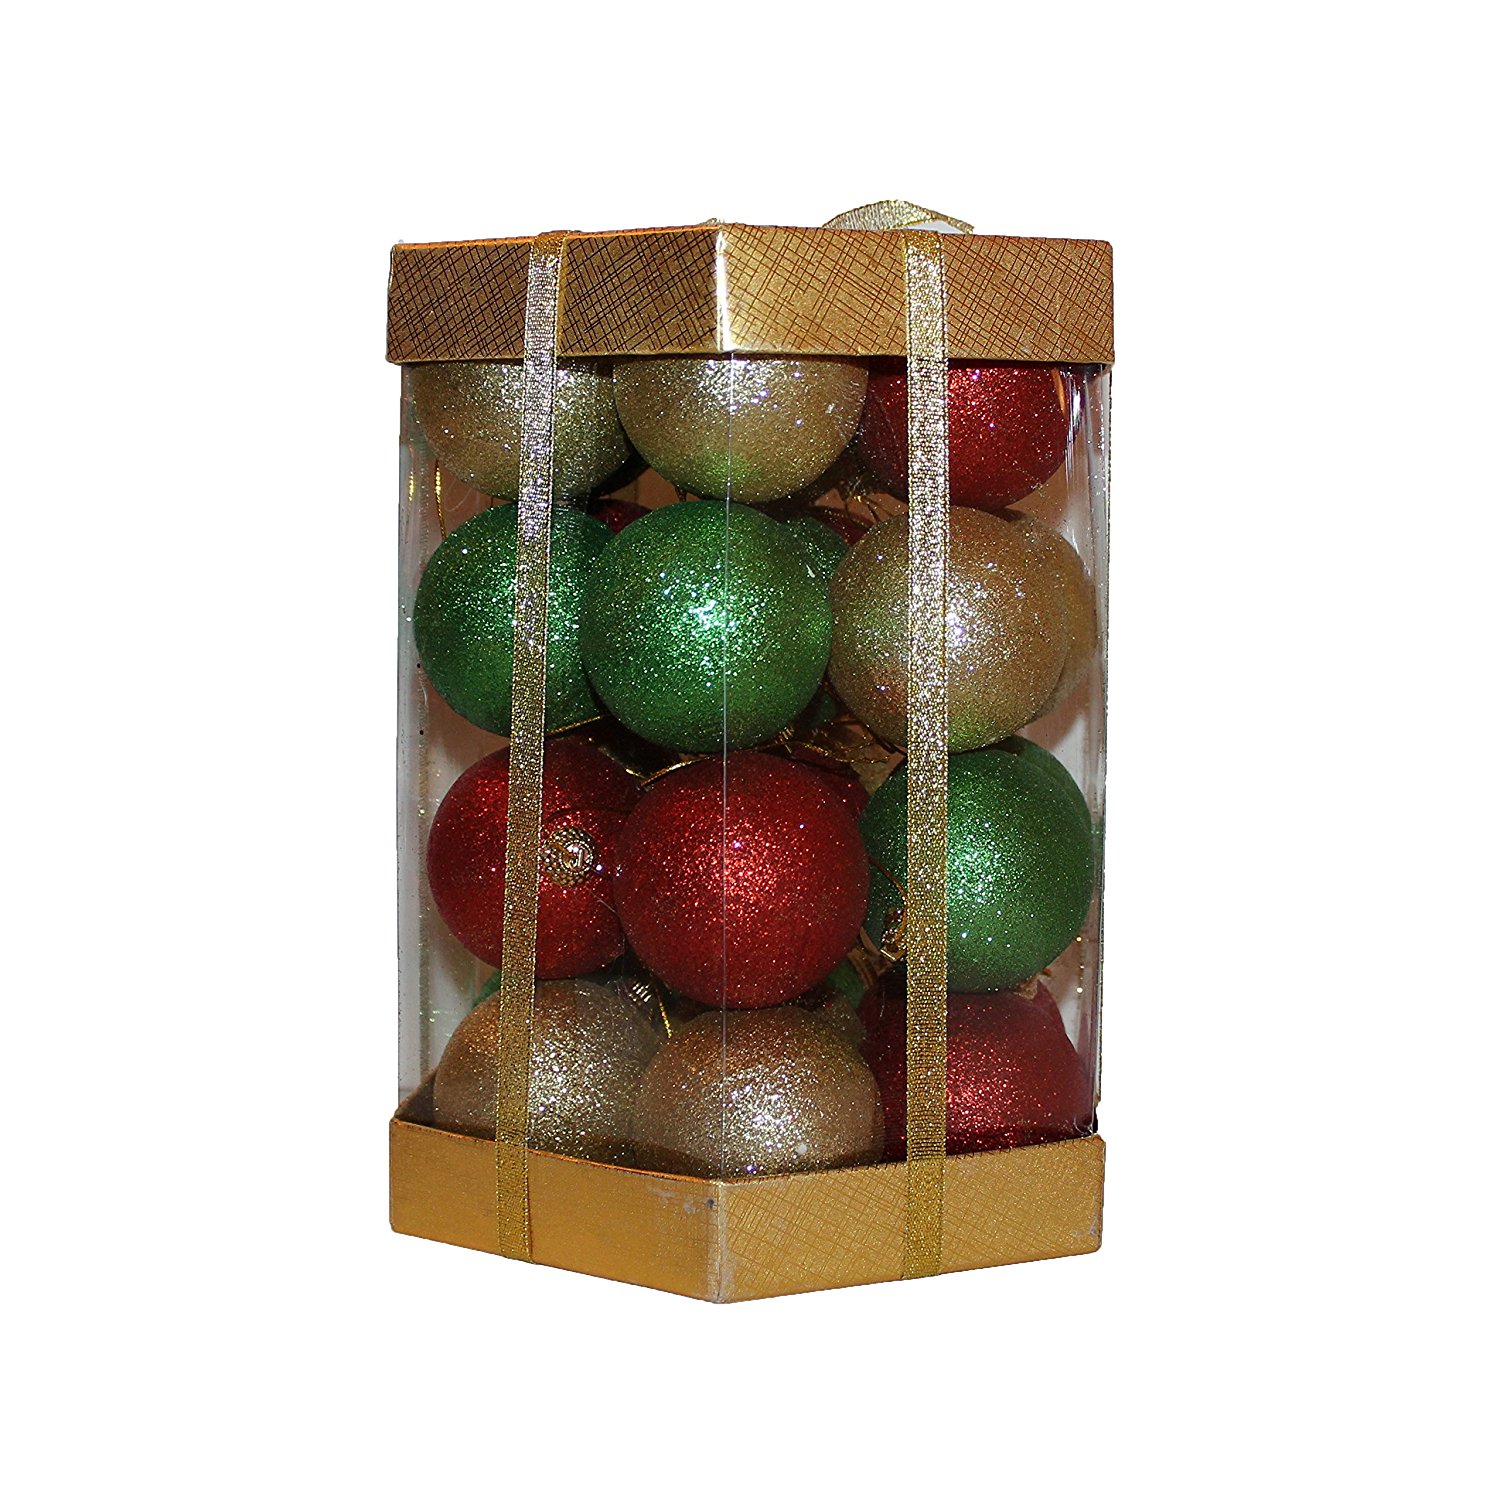 Amazon.com: 28 Count Glitter Christmas Ball Ornaments Boxed Set (Red ...